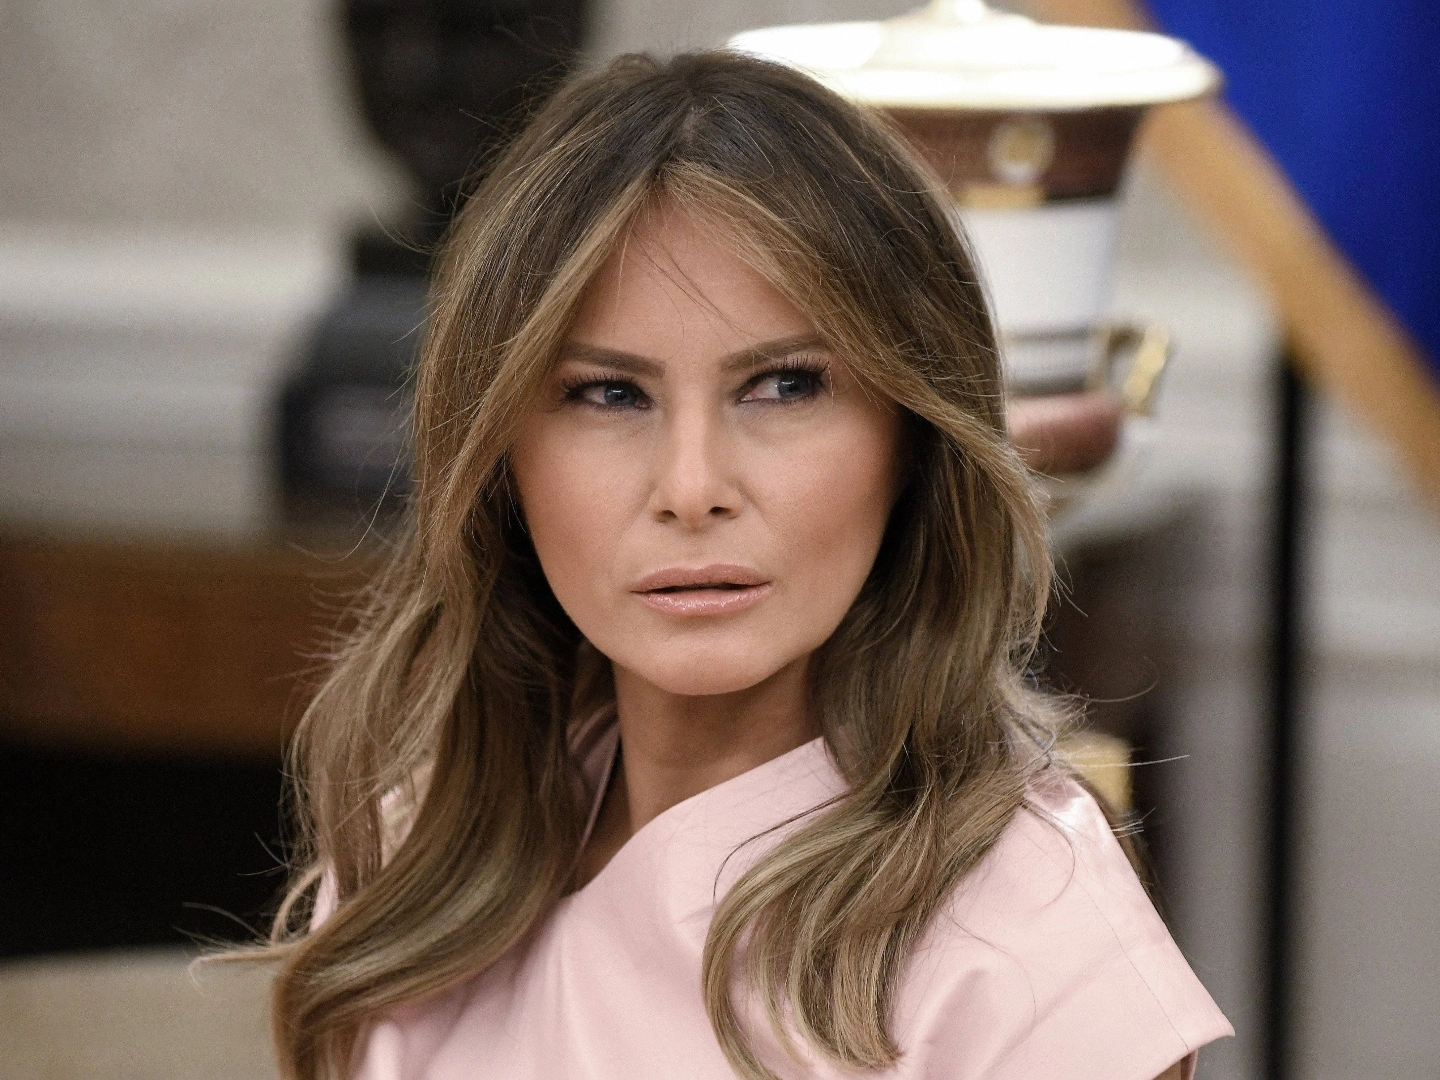 Melania Trump tells she has more useful things to do than pose for Vogue.